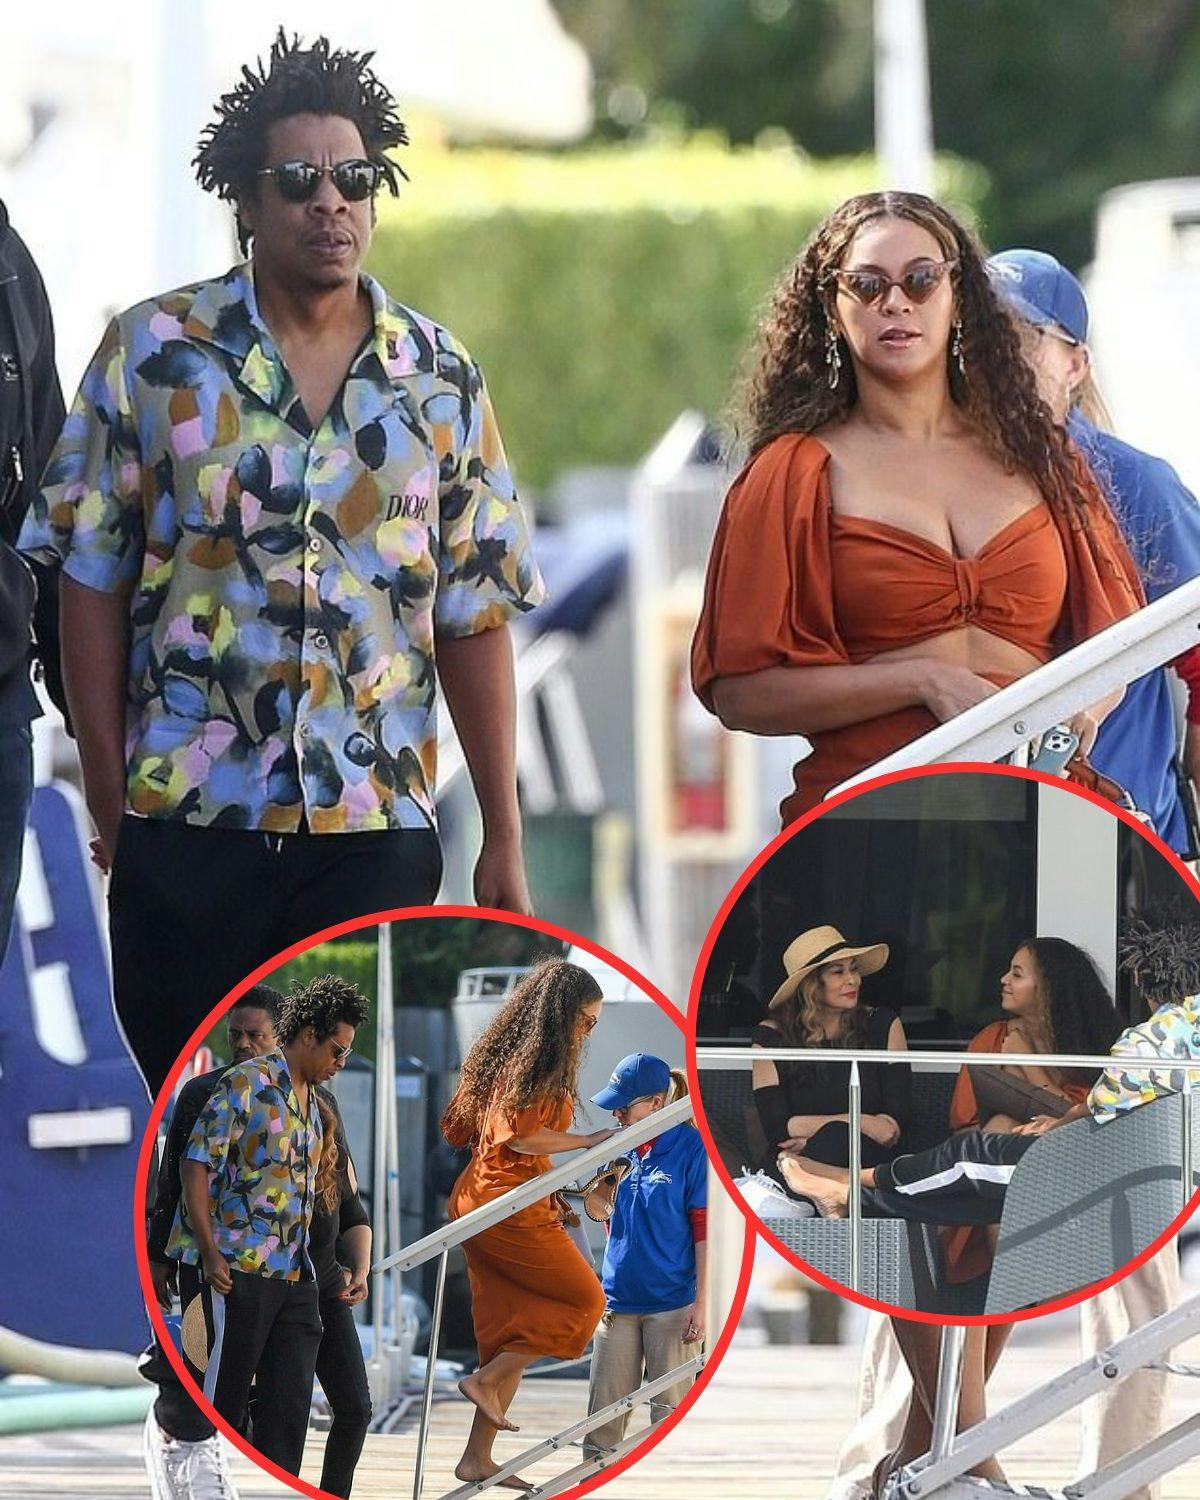 Cover Image for JAY BEY on BOAT: Beyoncé and Jay Z enjoyed a kid-free day on an extravagant yacht in Fort Lauderdale